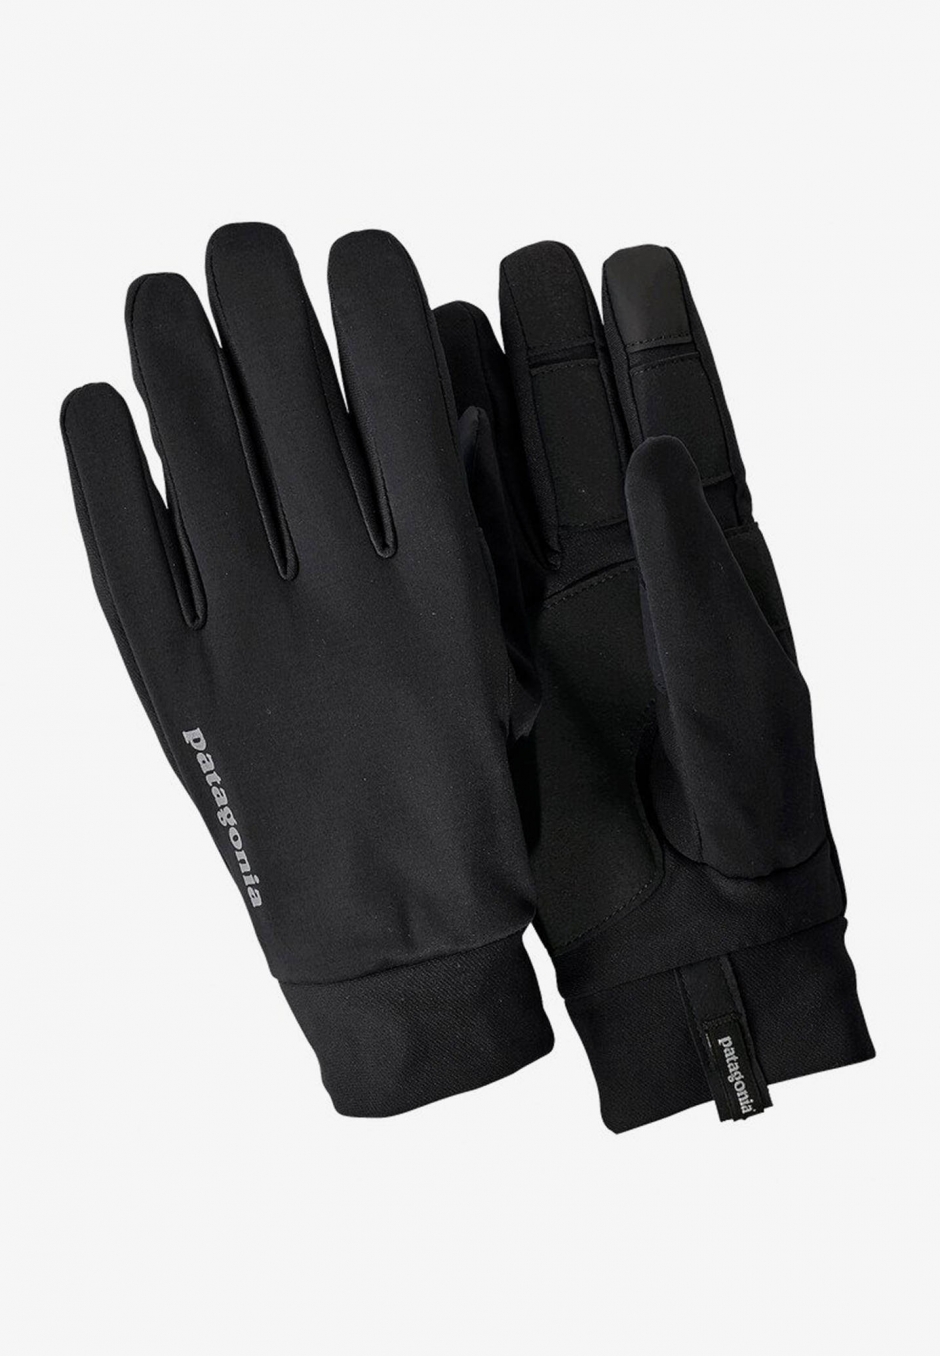 Patagonia Wind shield gloves